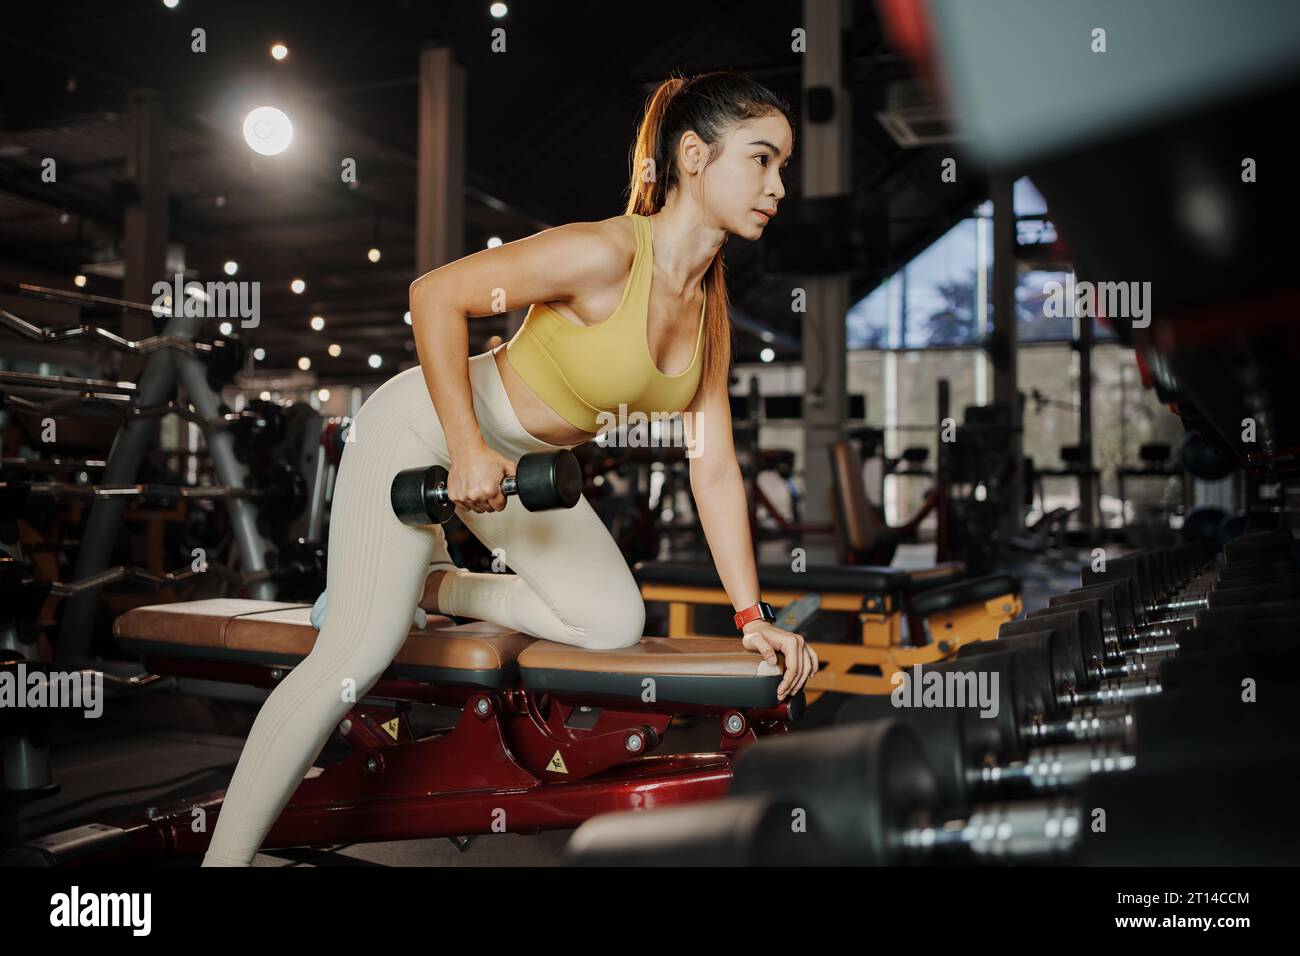 Fitness girl lifts dumbbells in the gym. Stock Photo